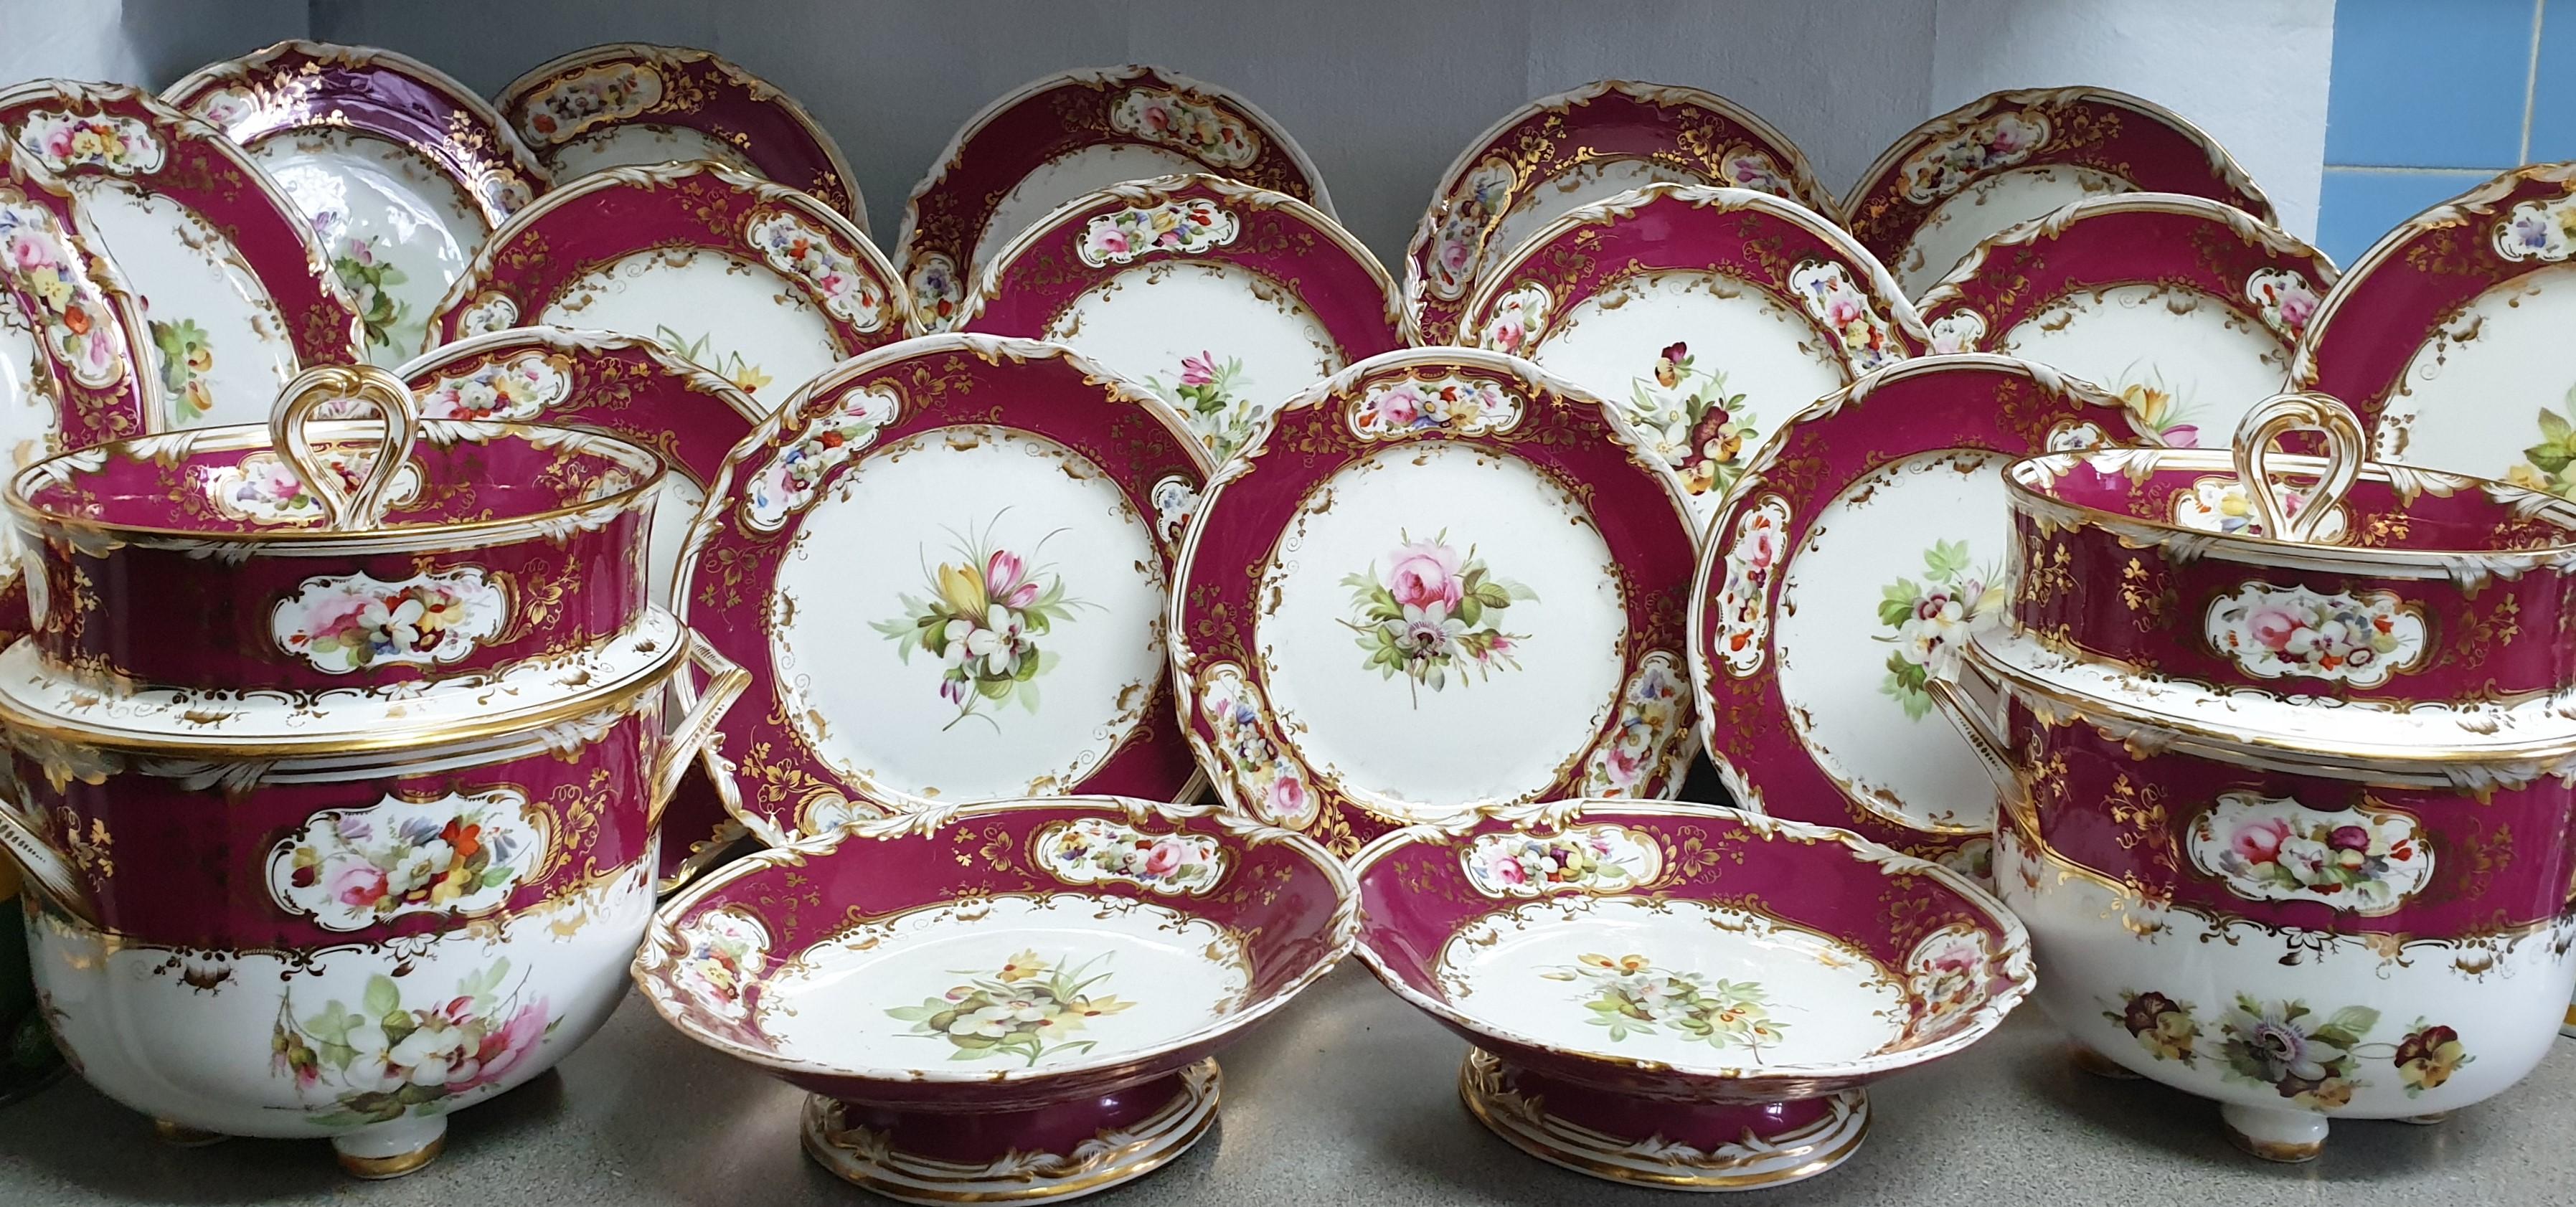 Porcelain English Royal Red Floral Coalport Dessert Service, circa 1840 With Ice Pails  For Sale